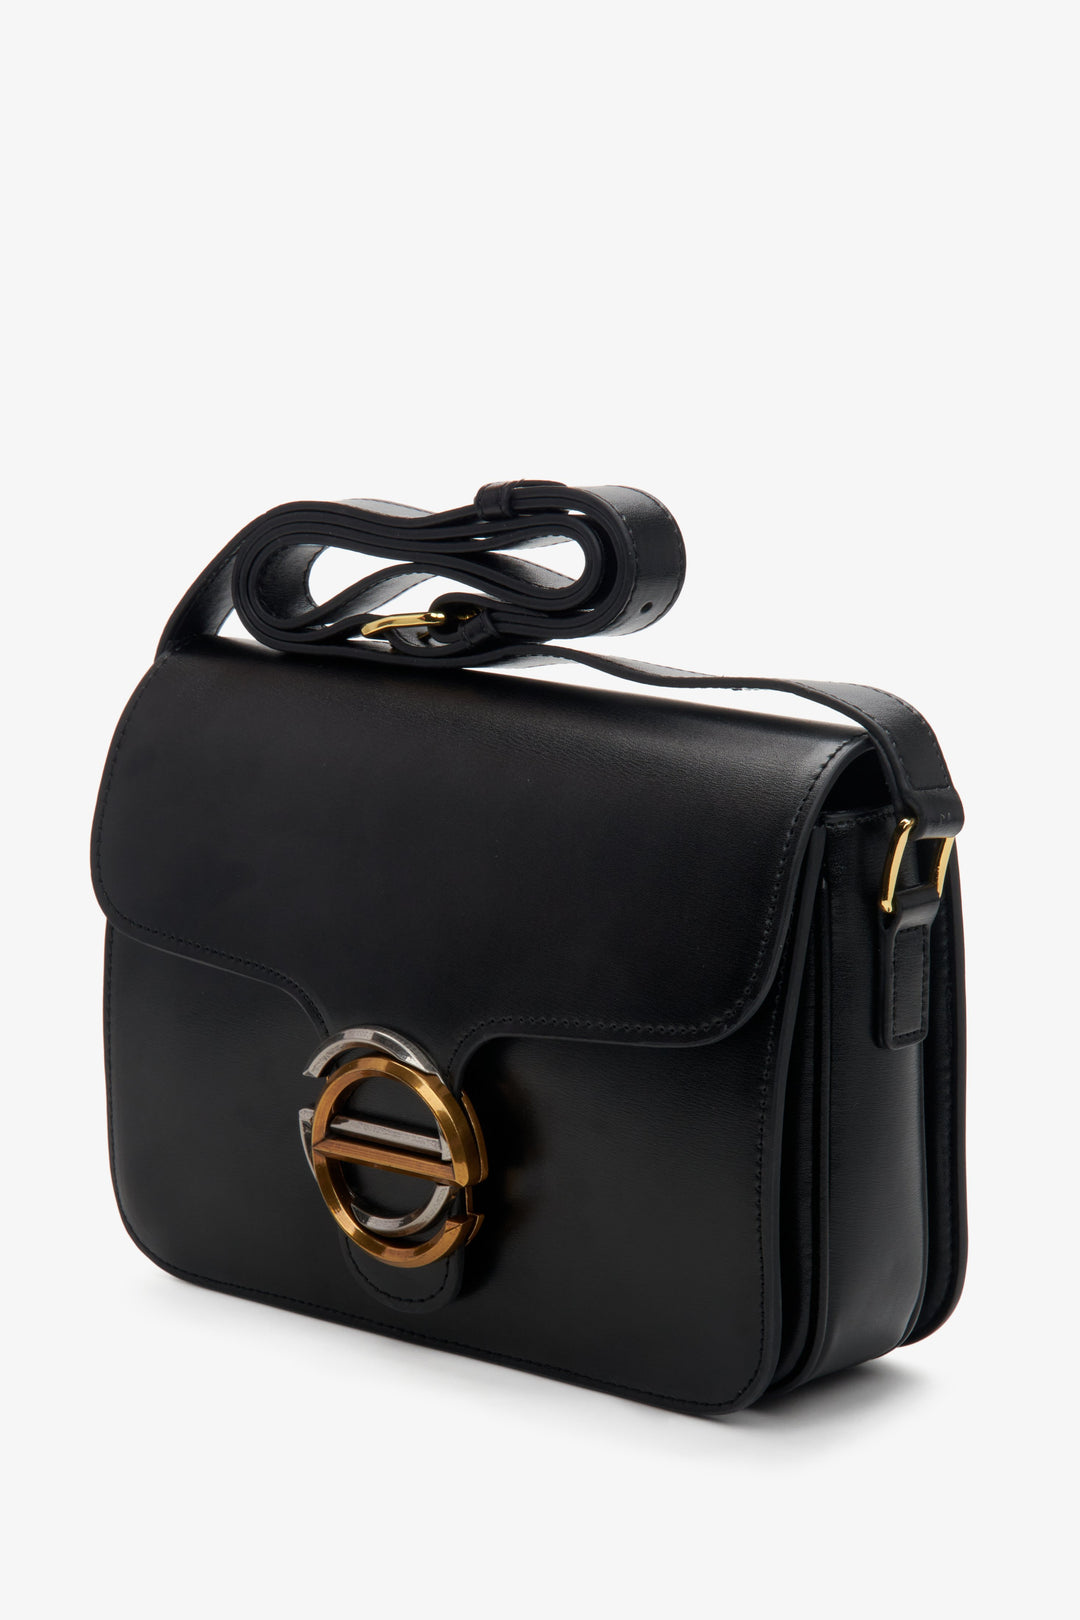 Women's black small leather bag by Estro.